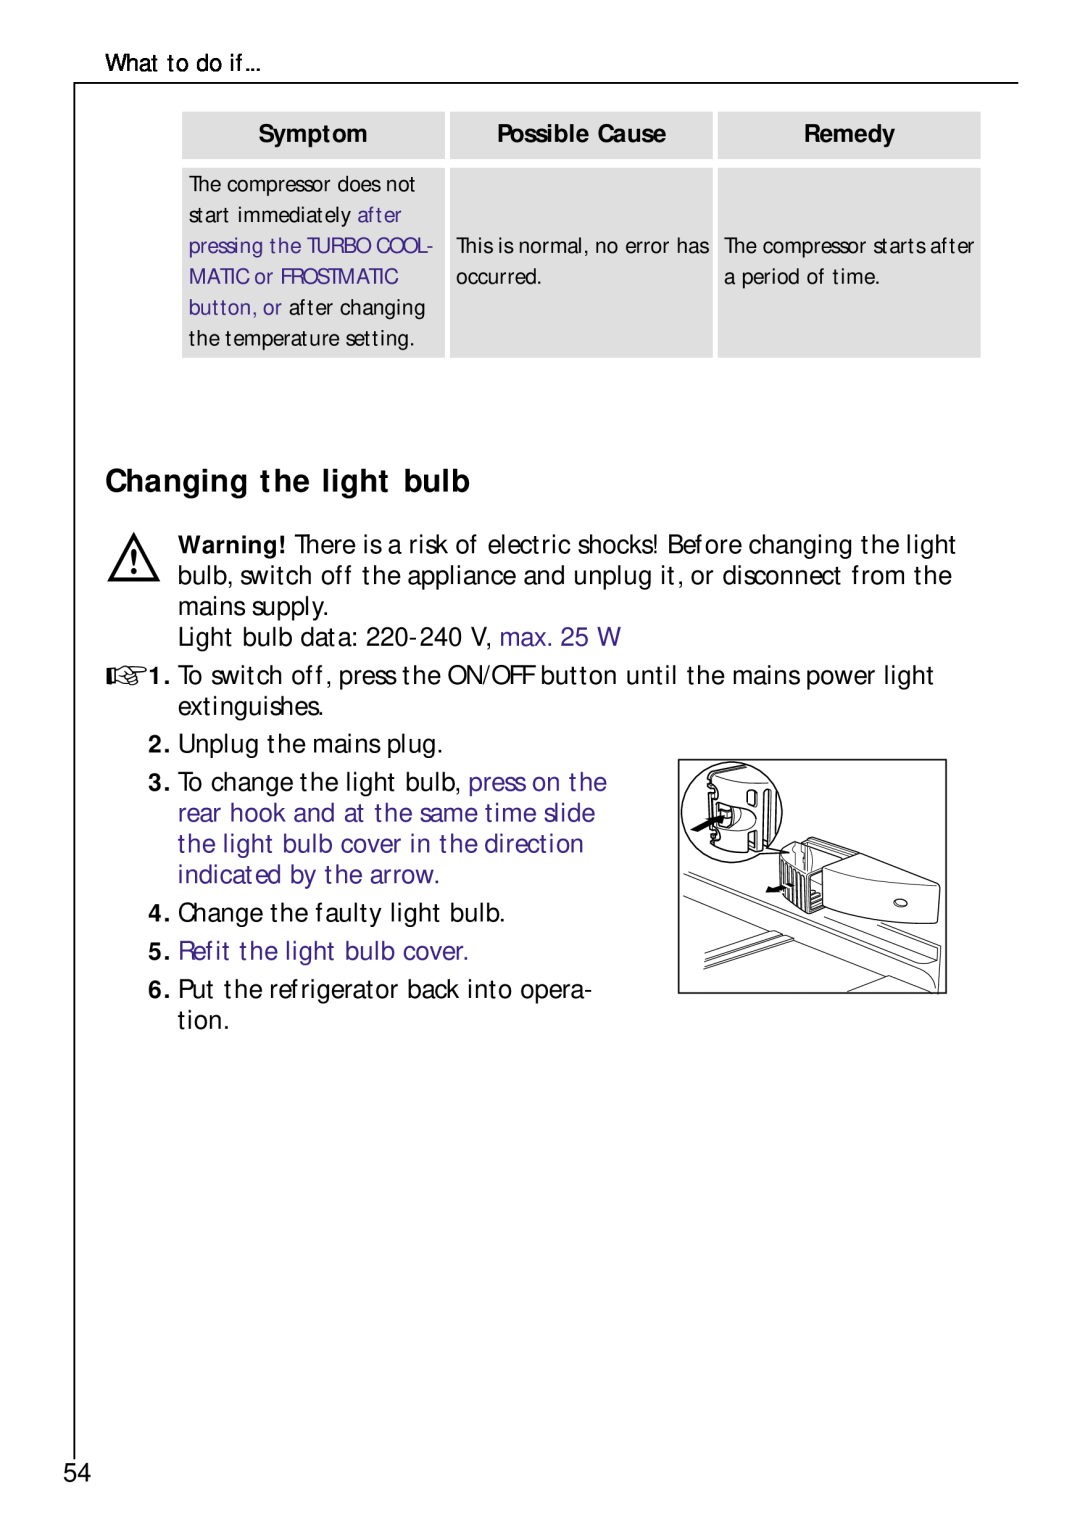 Electrolux Z 9 18 42-4 I user manual Changing the light bulb, Refit the light bulb cover, Symptom, Possible Cause, Remedy 